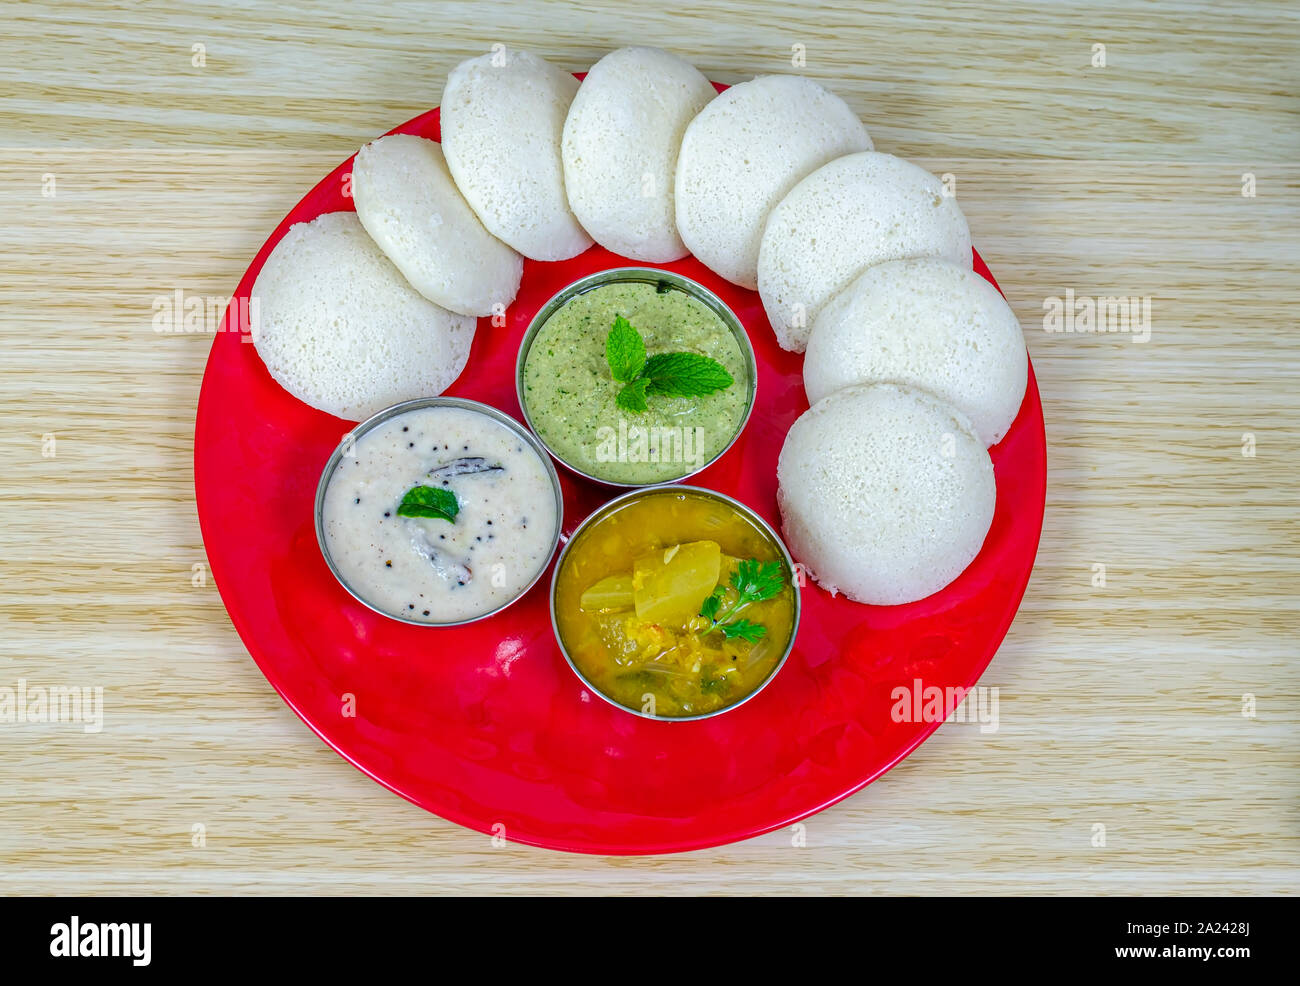 Idlis arranged in a circular formation with white and green chutneys, and sambar in a red plate. Stock Photo